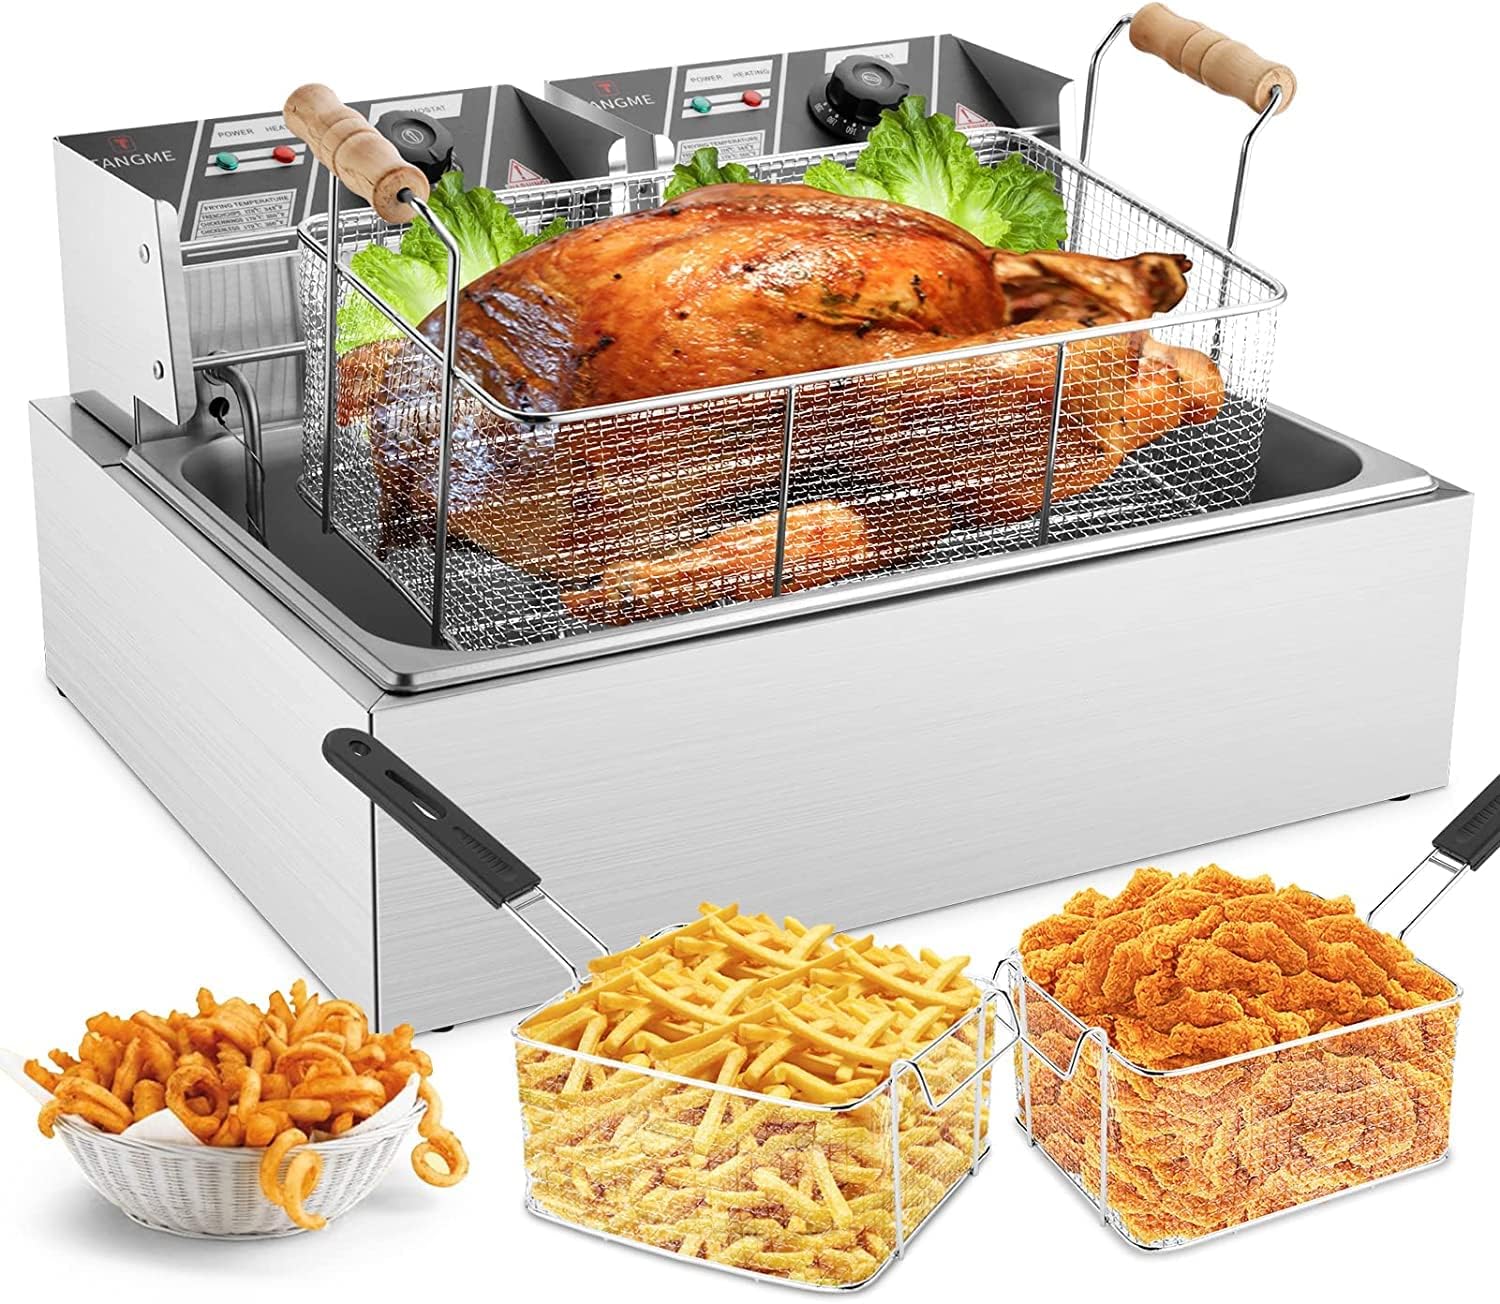 TANGME Commercial Deep Fryer, 3400w Electric Turkey Fryer with Large Basket